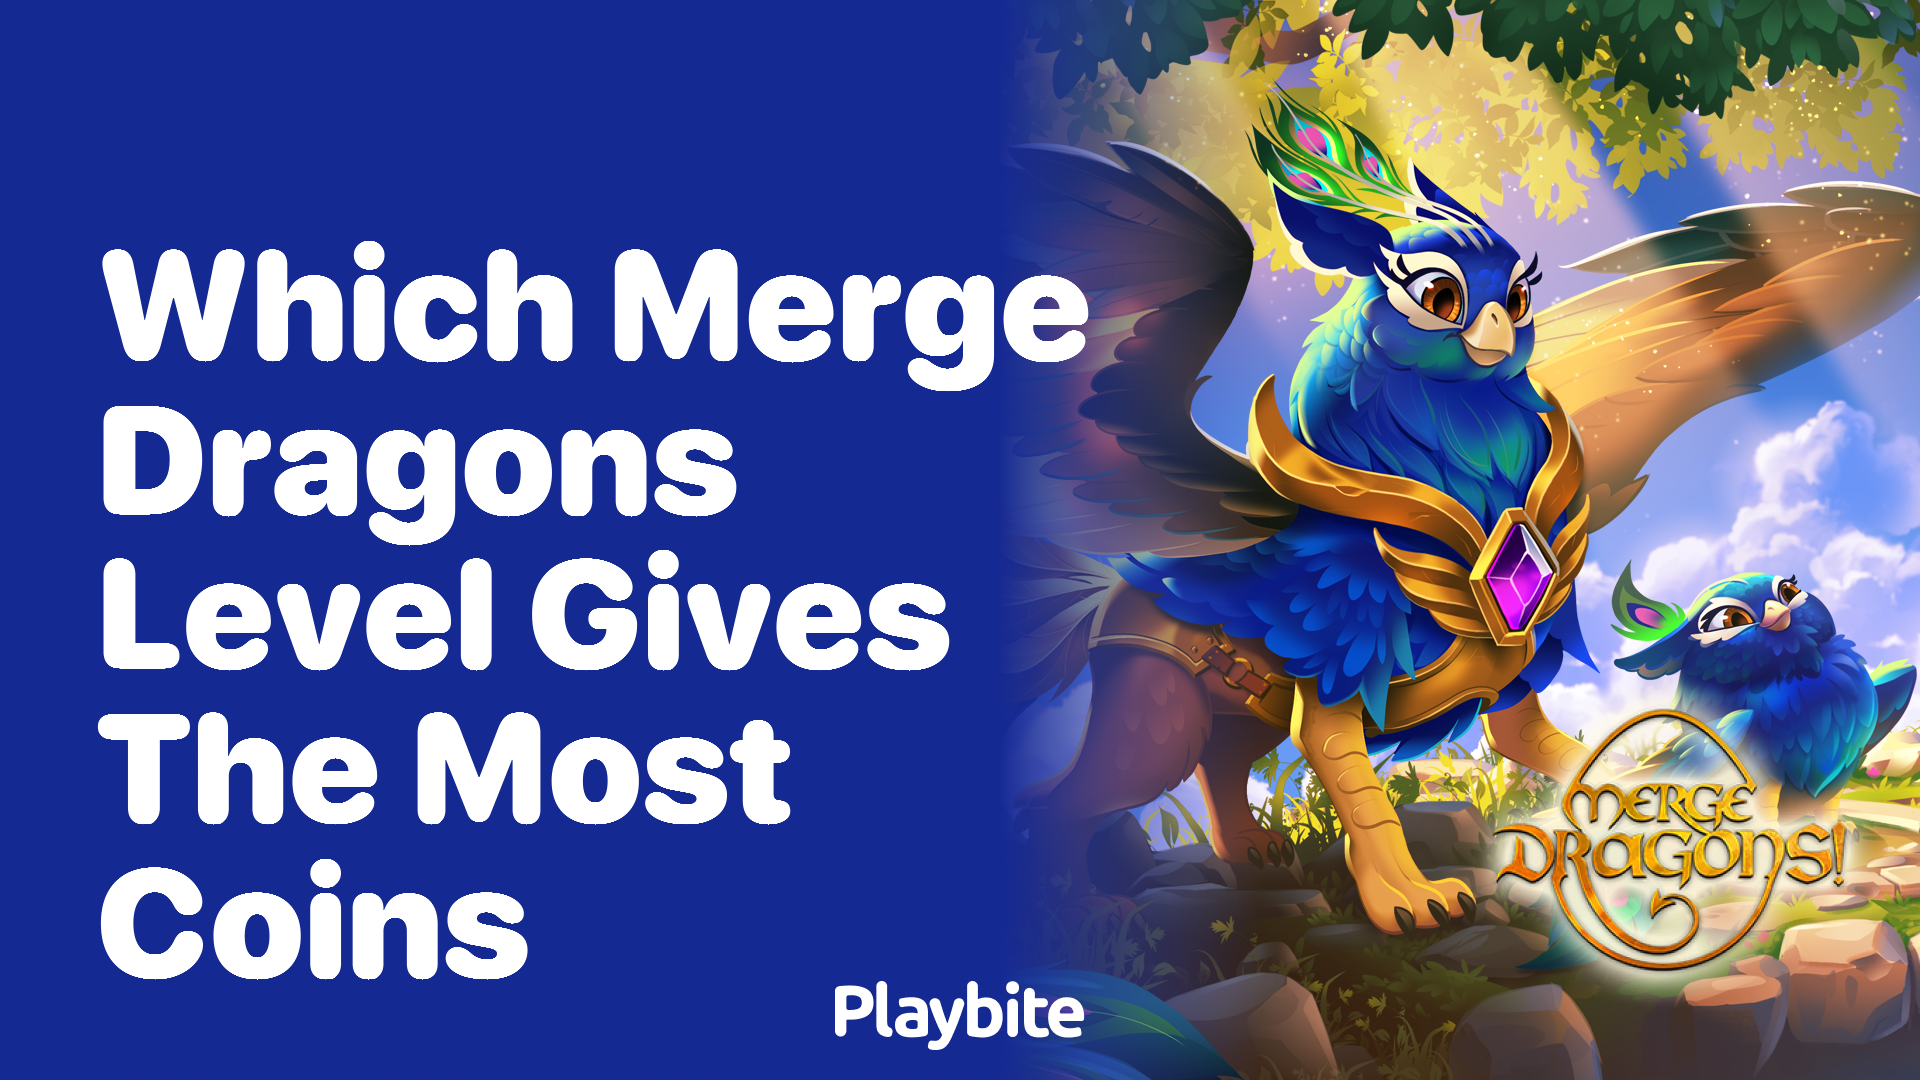 Which Merge Dragons level gives the most coins?